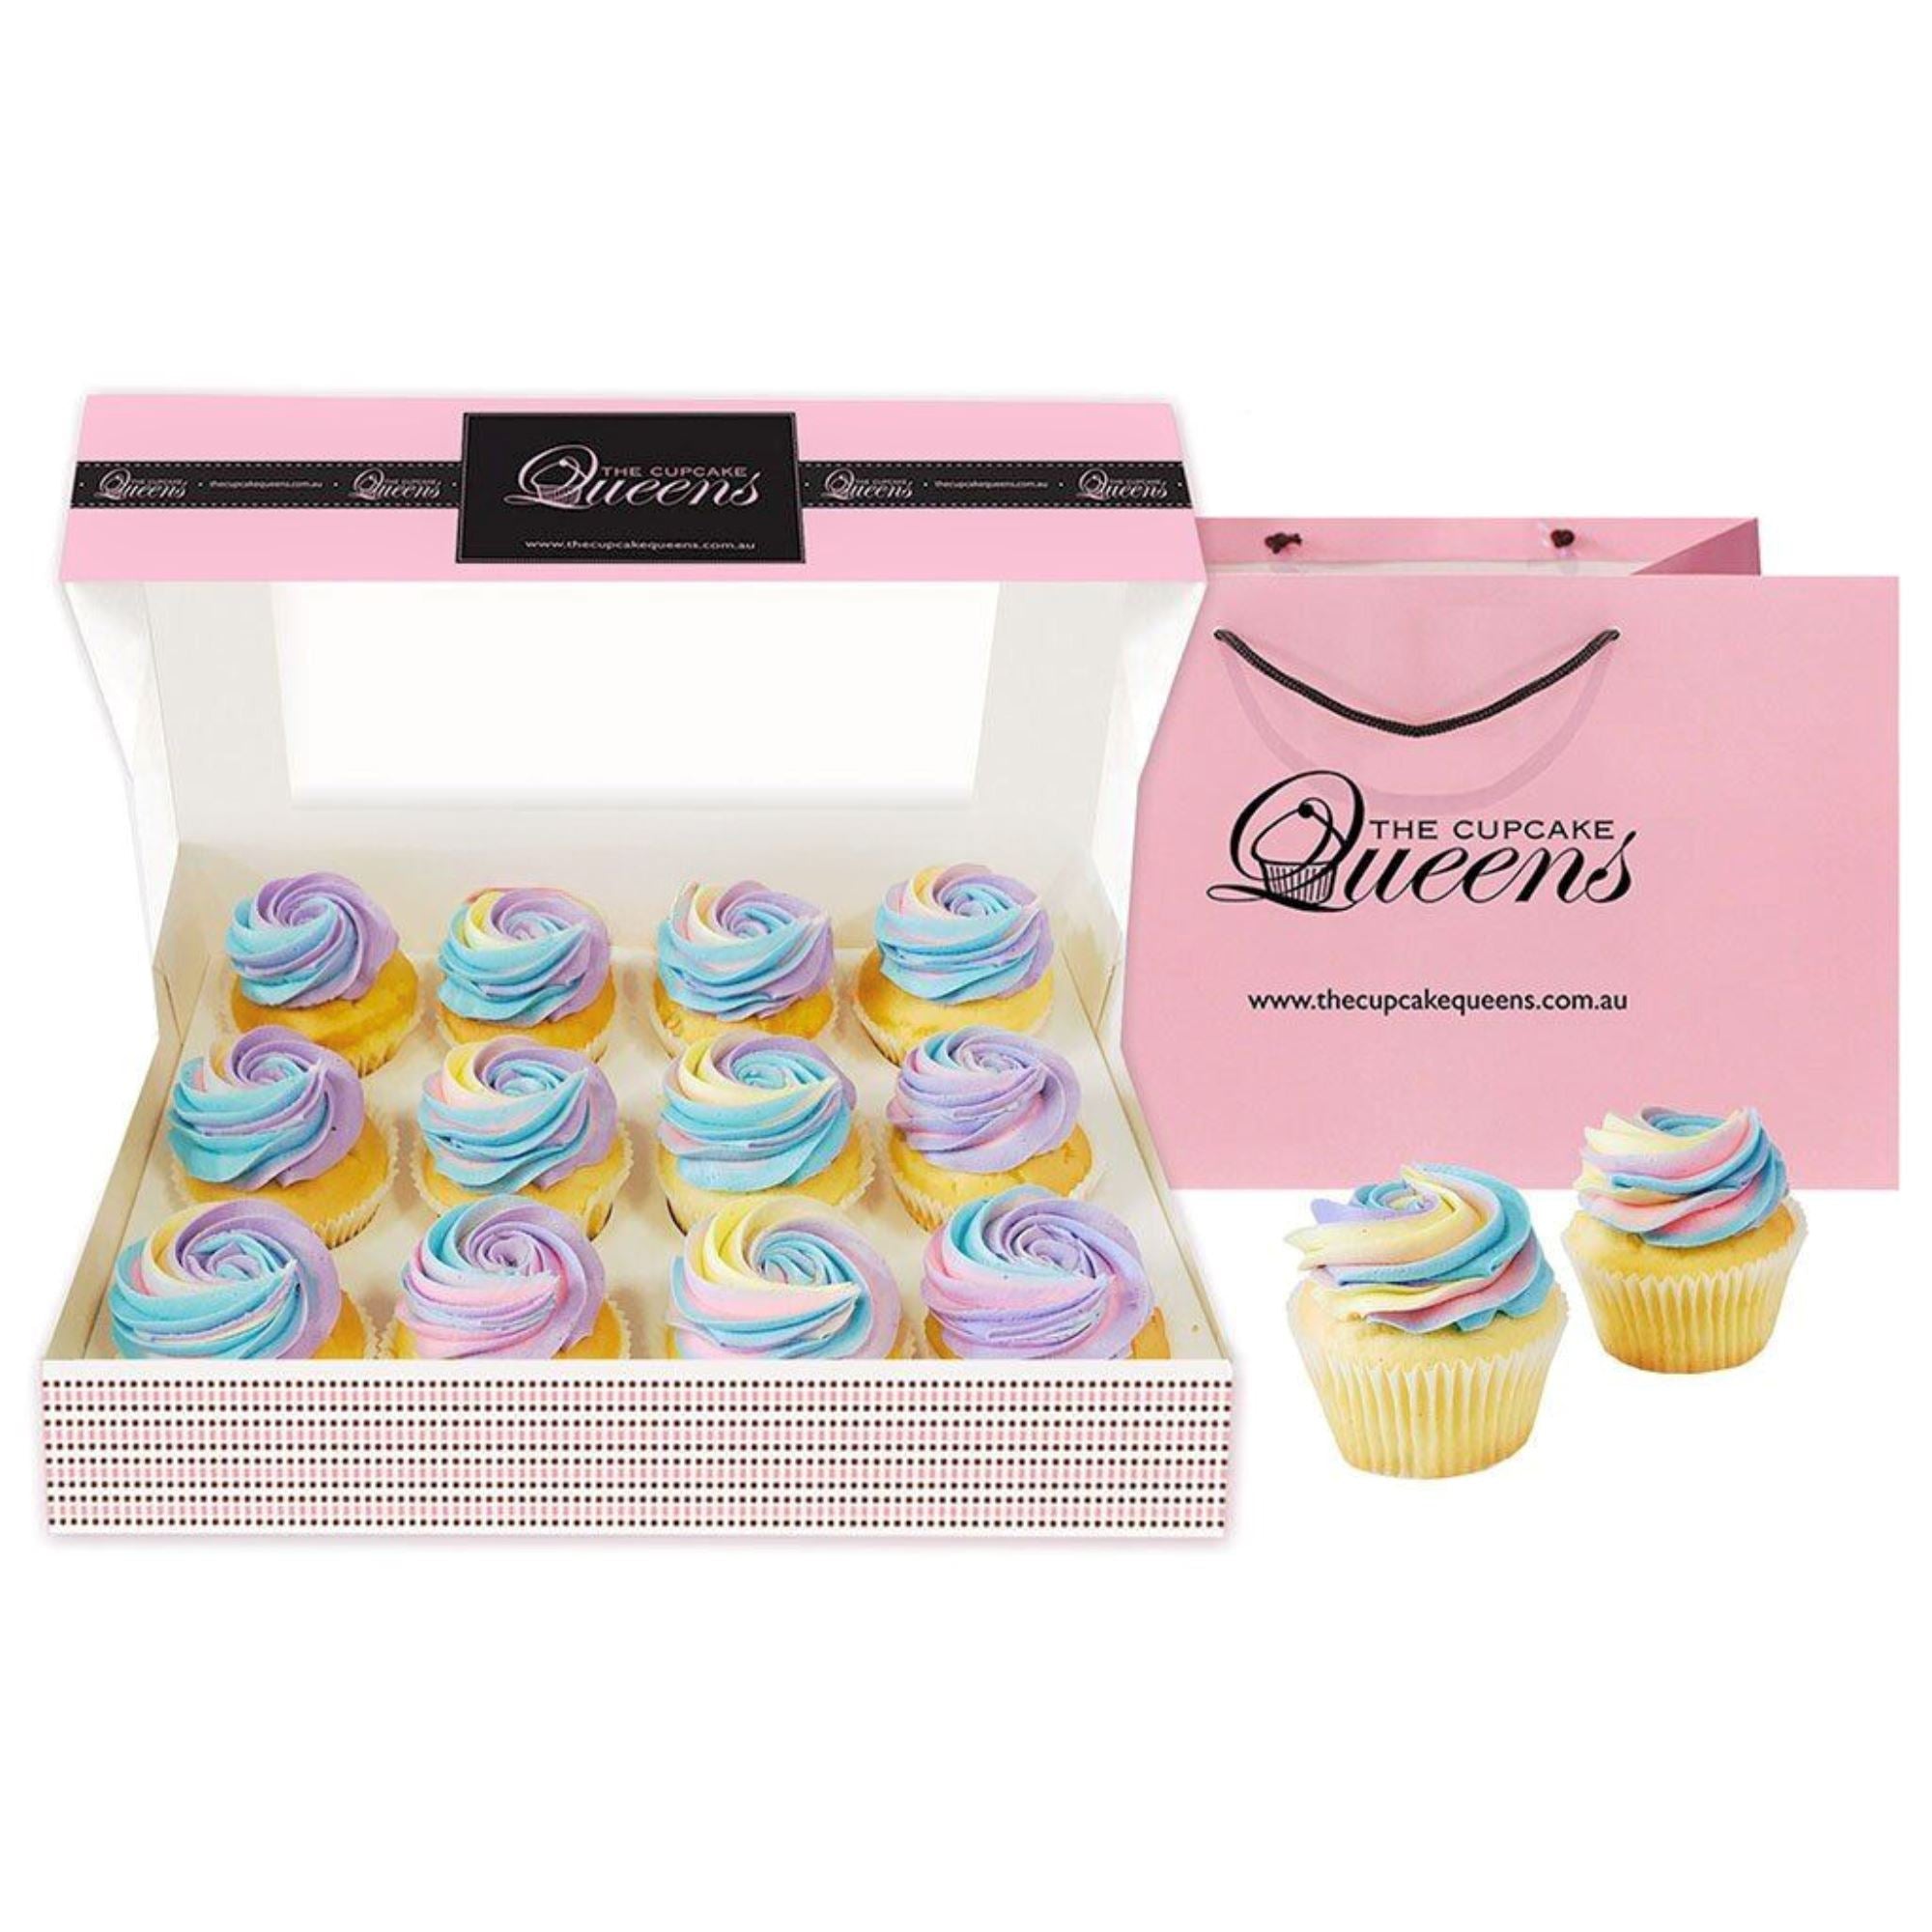 Over the Rainbow Giftbox Cupcakes Pre Selected Boxes The Cupcake Queens 